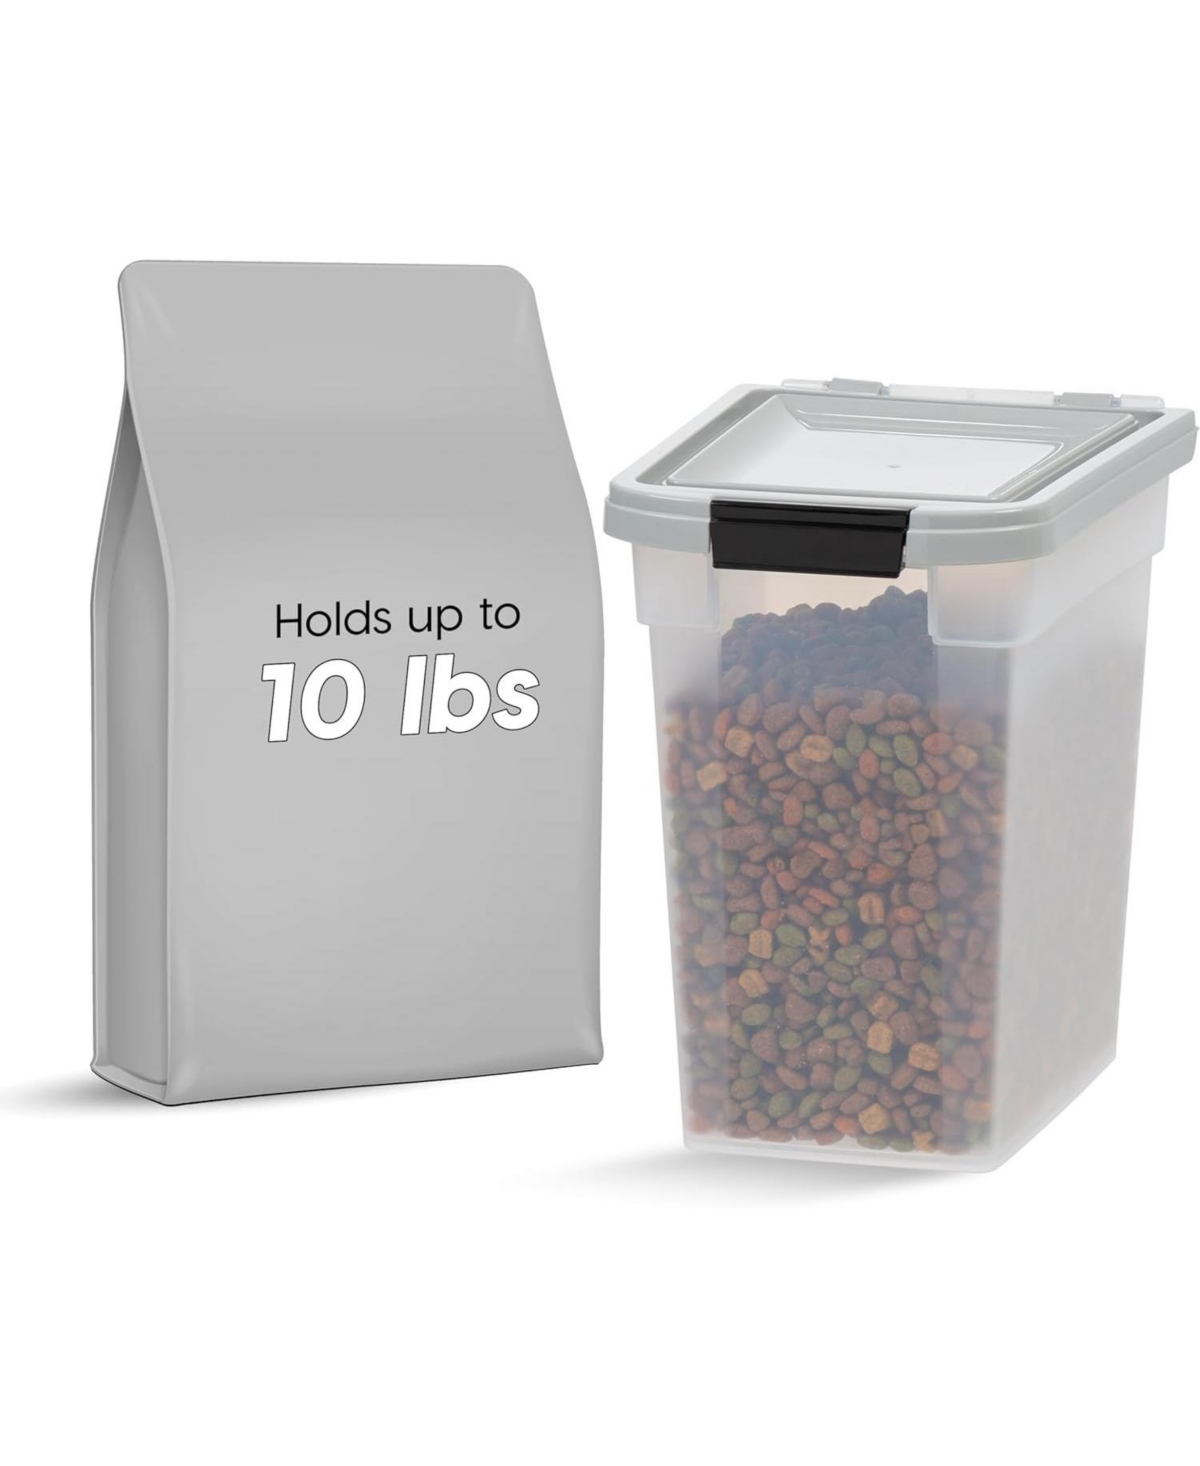 12.75 Quart Airtight Pet Food Storage Container for Dog, Cat, Bird and Other Animals, Gray - Grey